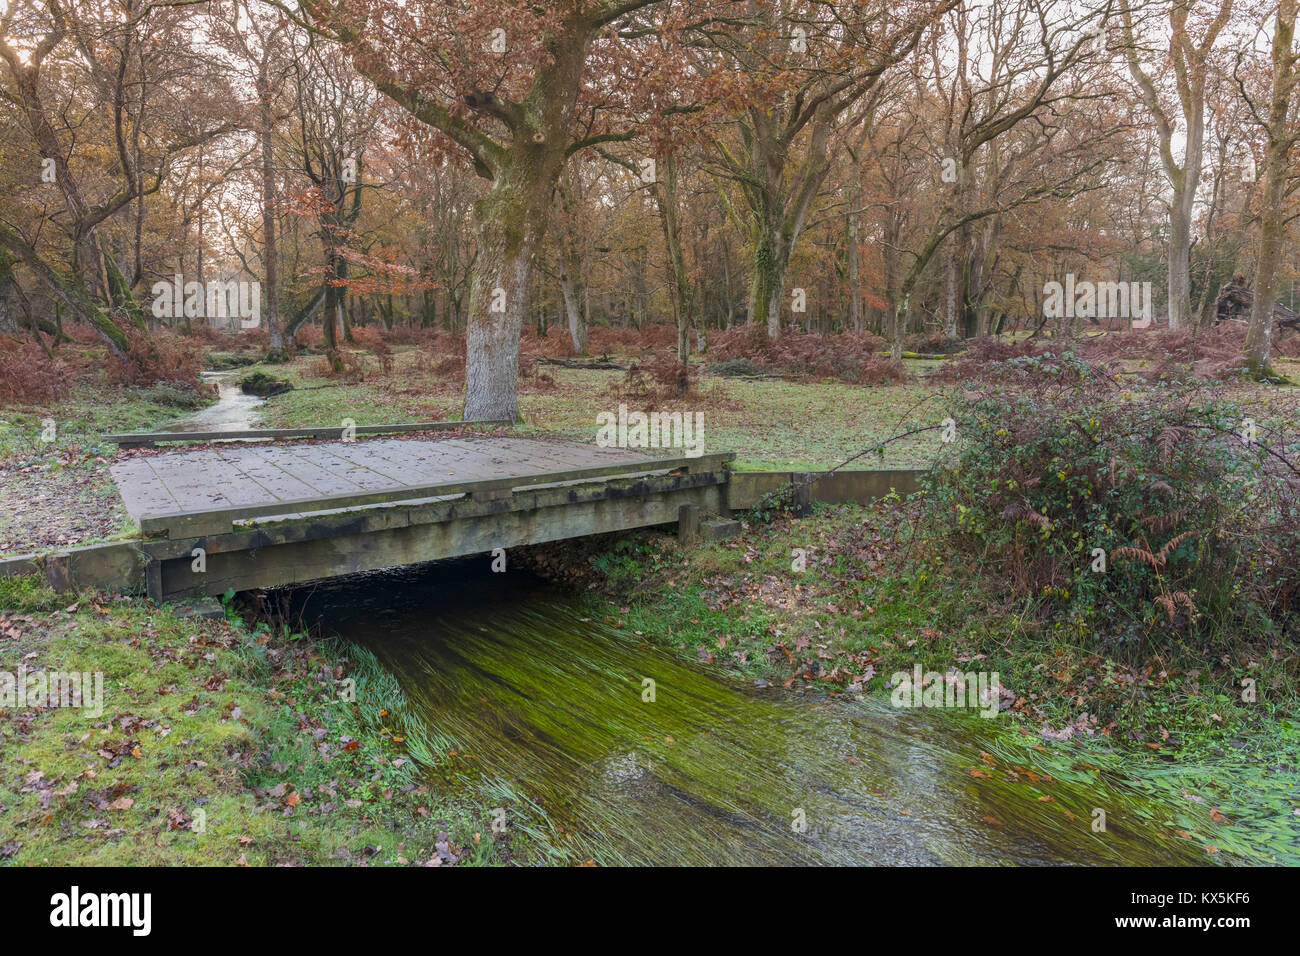 Passerelle, Stream, Automne, New Forest, Hampshire, England, UK Banque D'Images